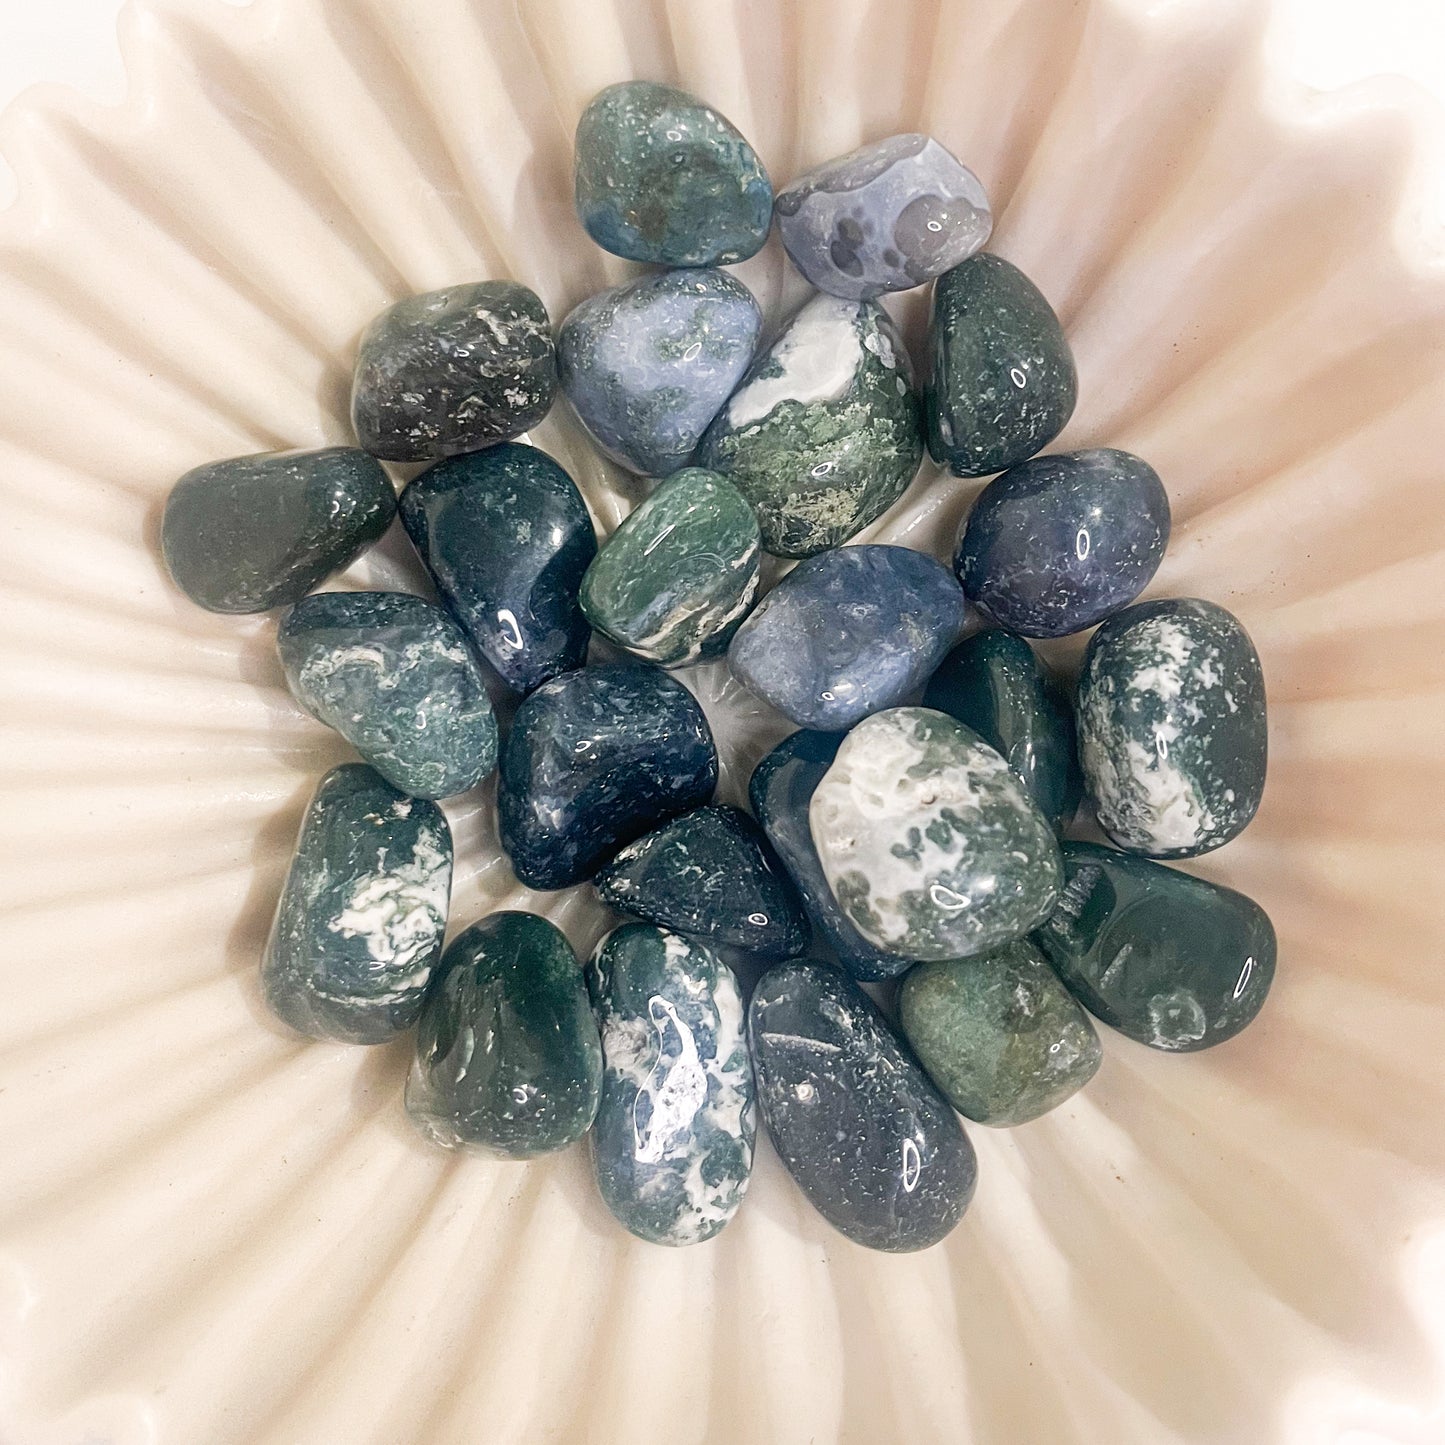 Crystal Tumble Stones - Green Moss Agate